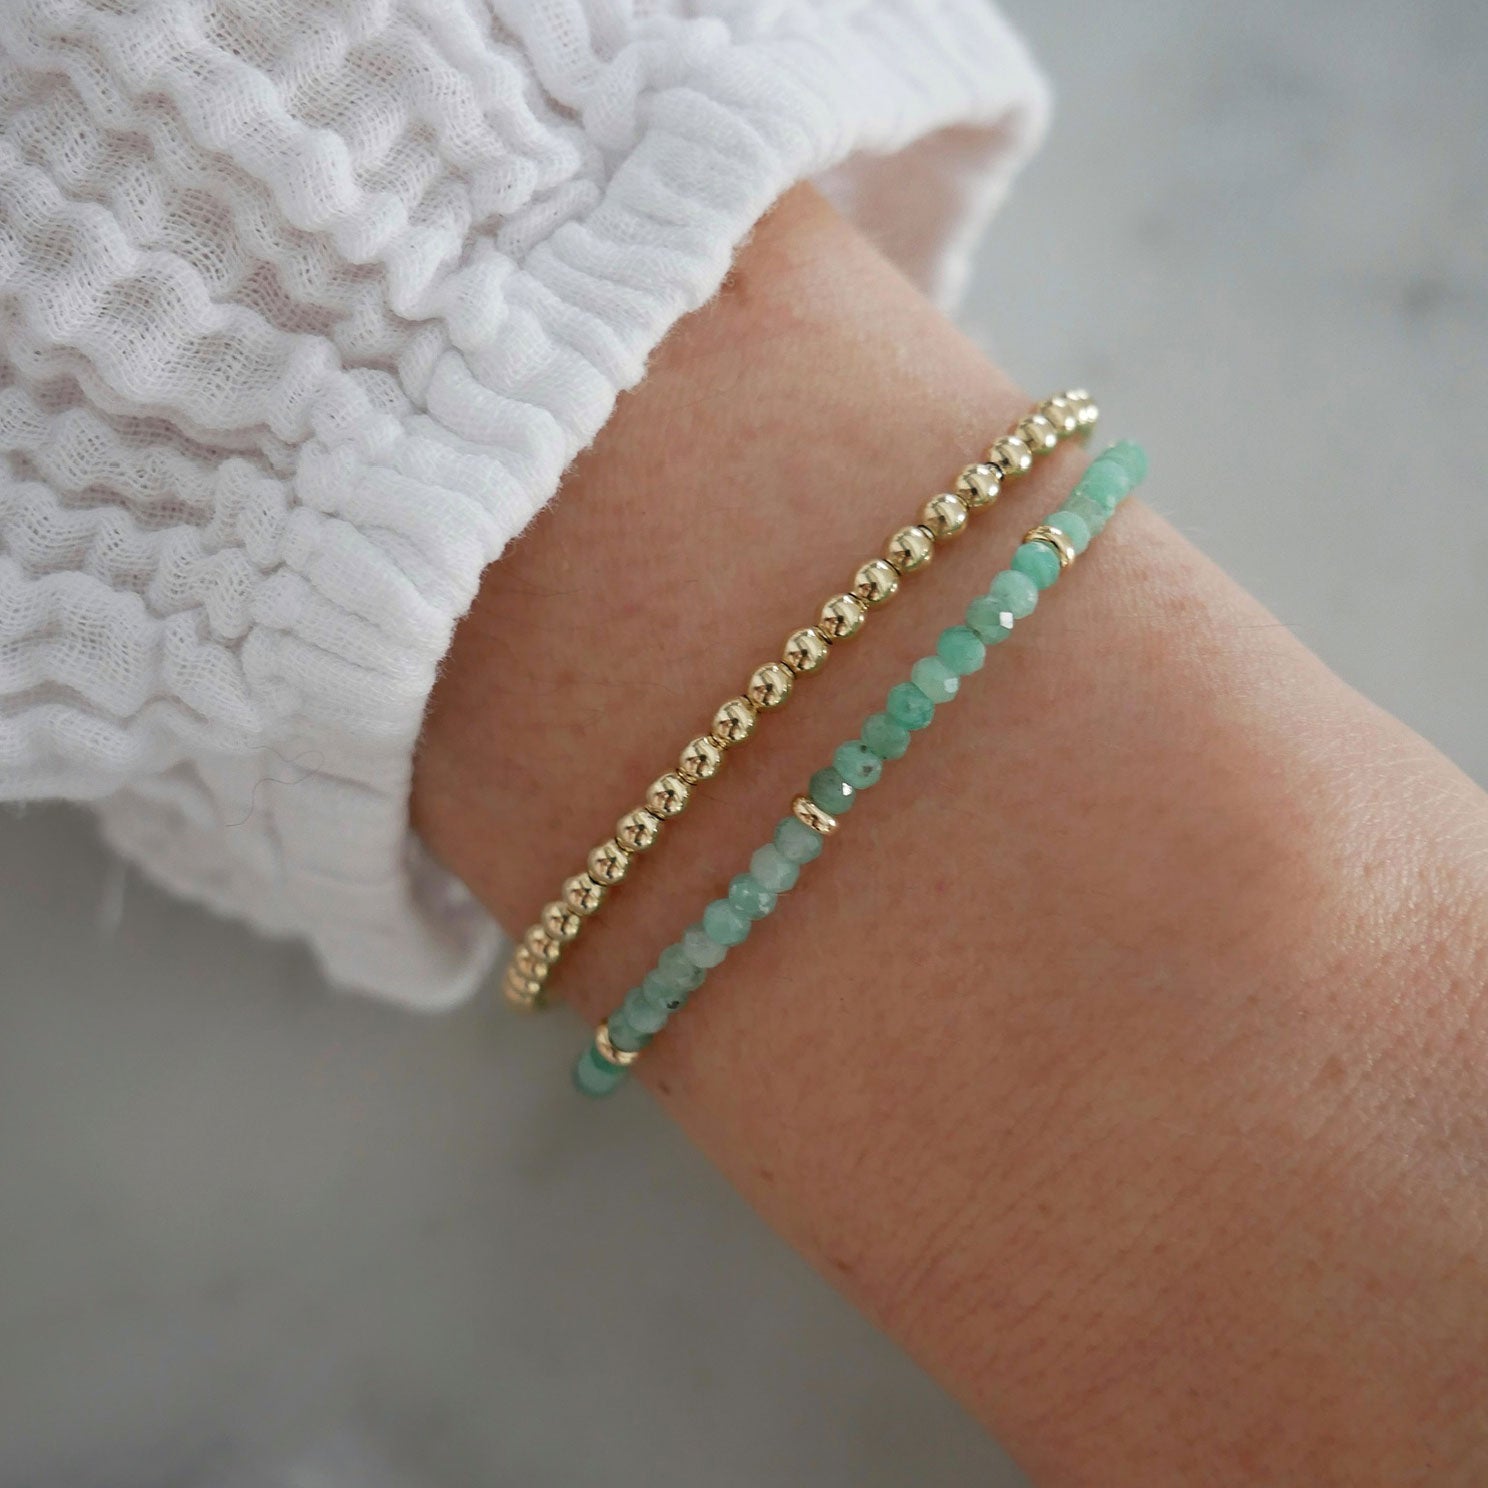 Birthstone Bead Bracelet In Emerald styled on wrist of model with gold ball bracelet and white sleeve